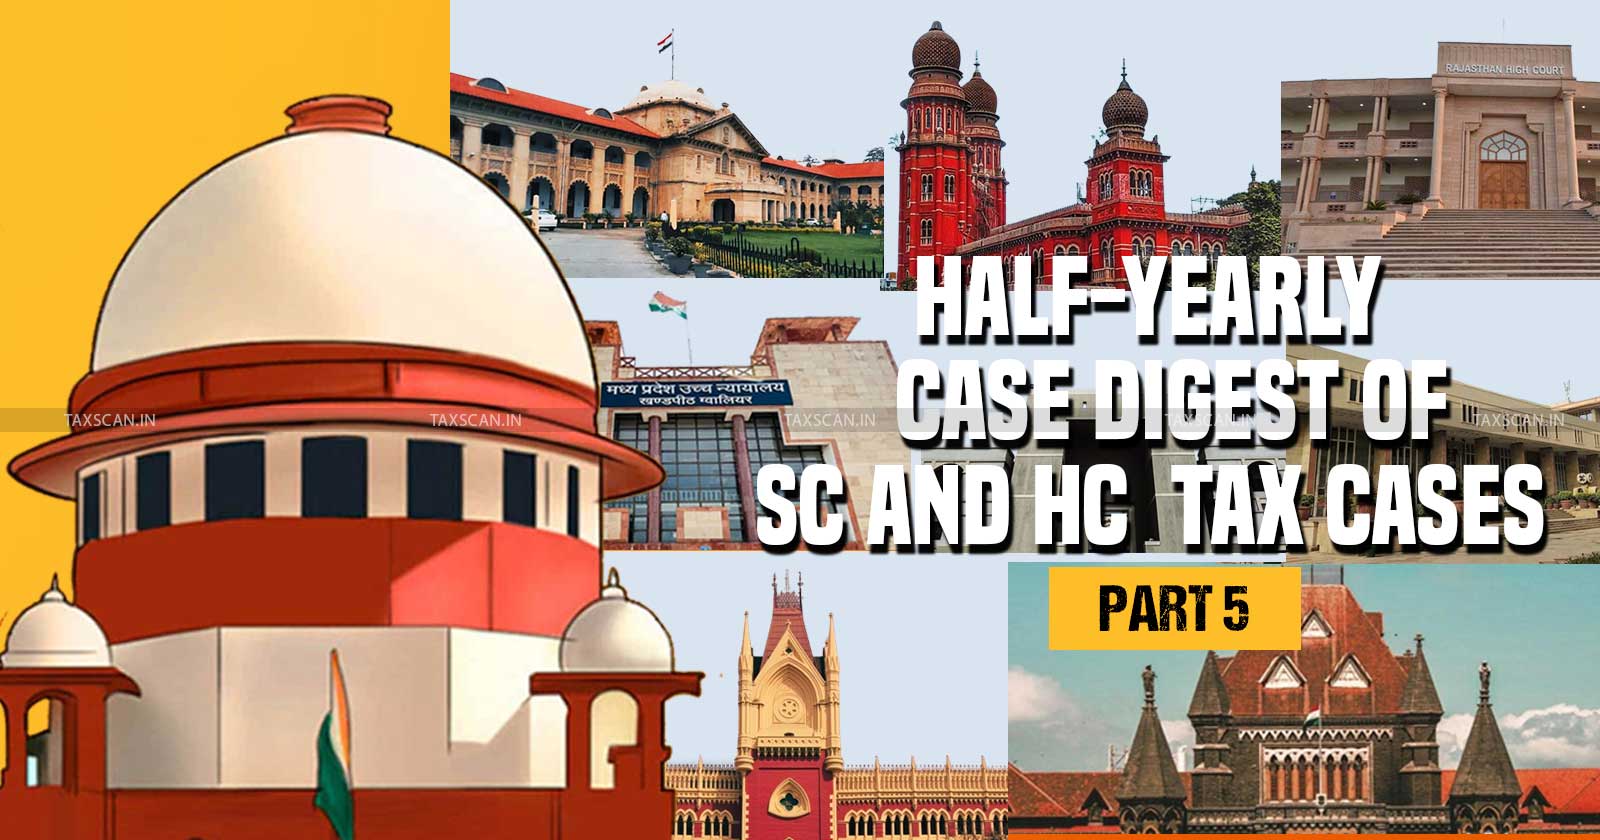 Half Yearly Case Digest - Supreme Court and High Courts Case Digest - Half Yearly Digest of Tax Cases - Half Yearly Digest of Tax Cases - taxscan